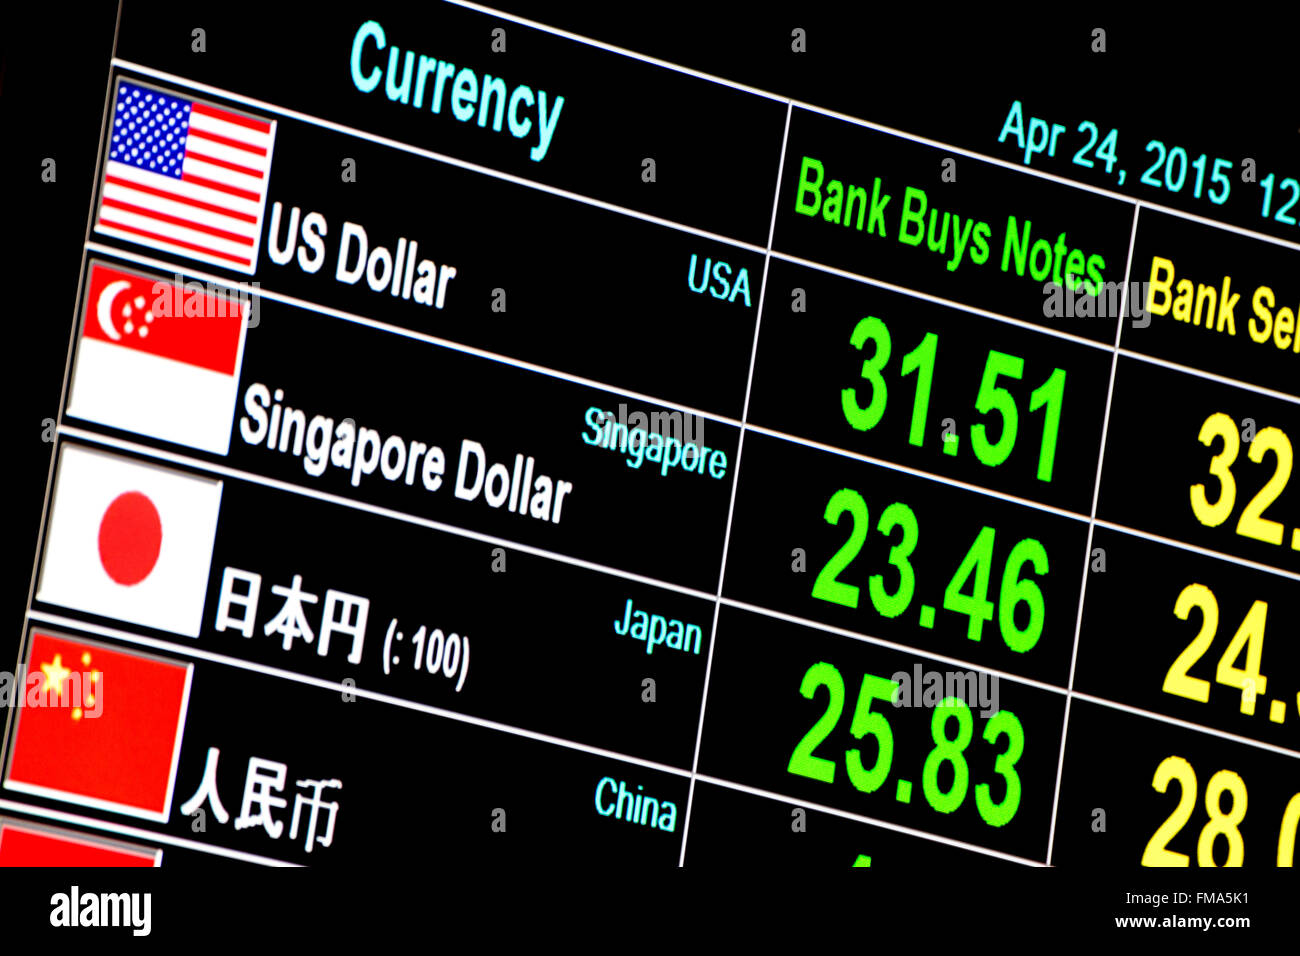 foreign currency exchange rate on digital LED display board in the airport. Stock Photo